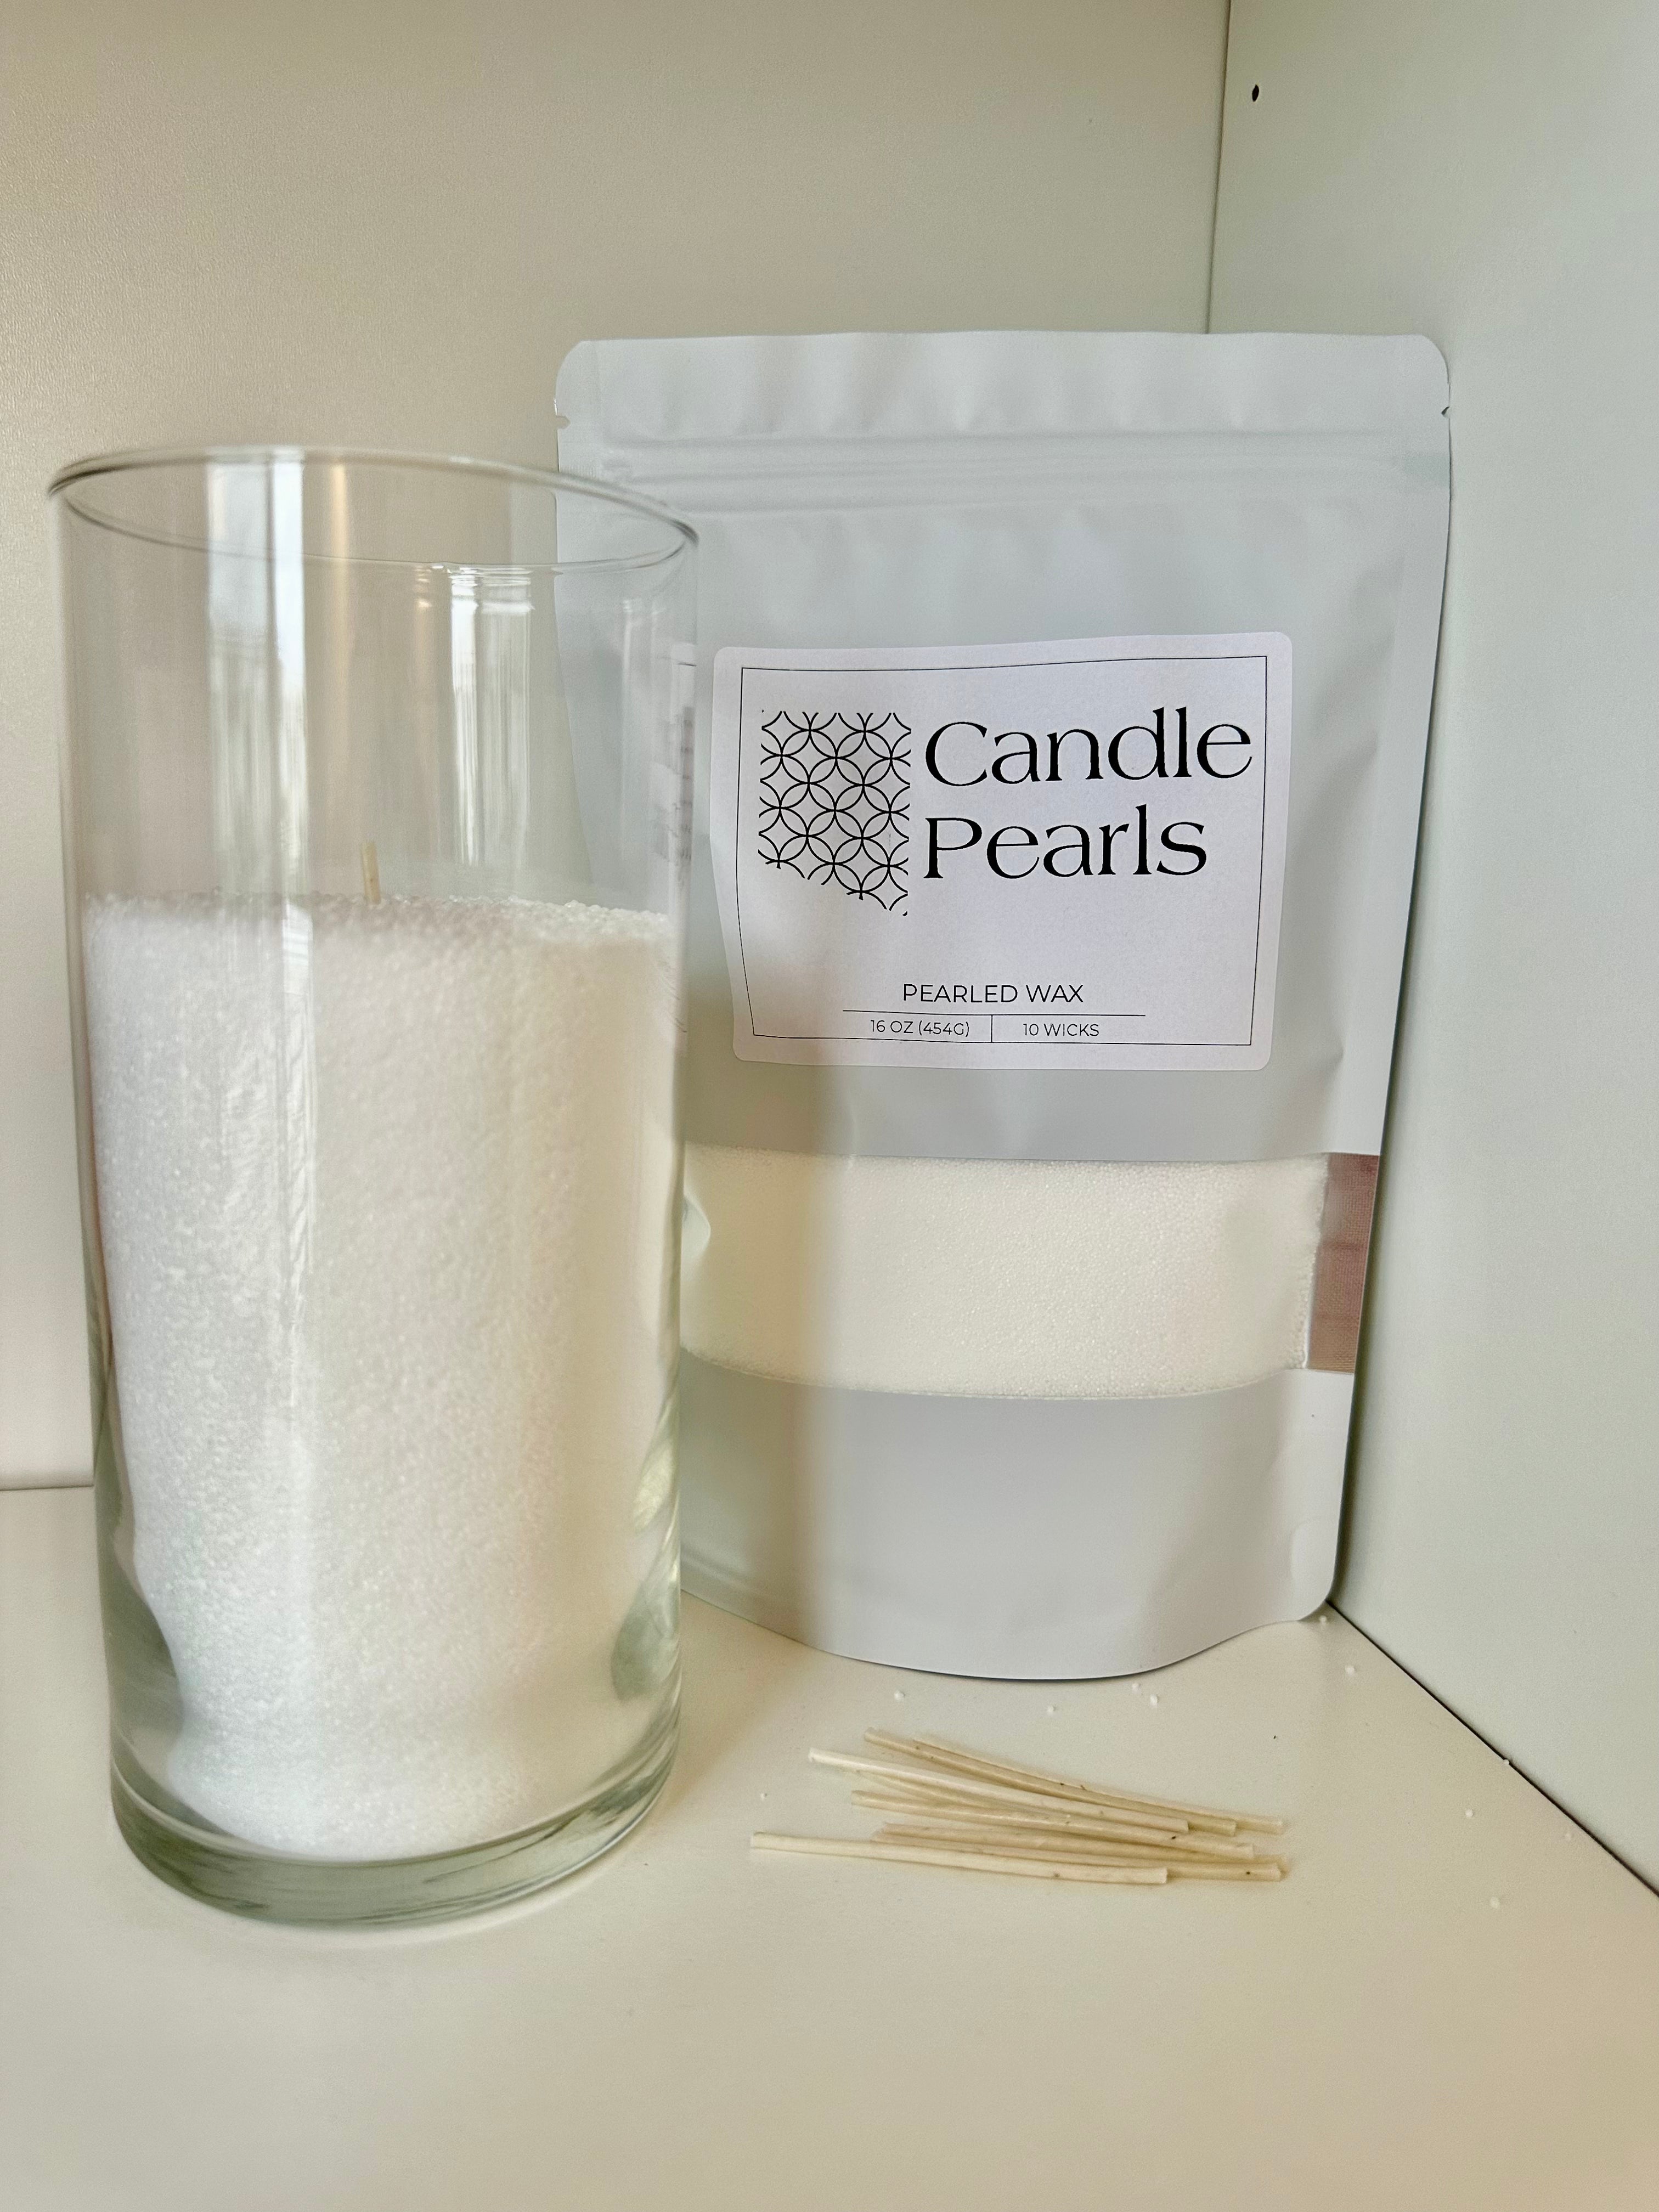 Pearled Wax 11 lbs (5kg) – Candle Pearls